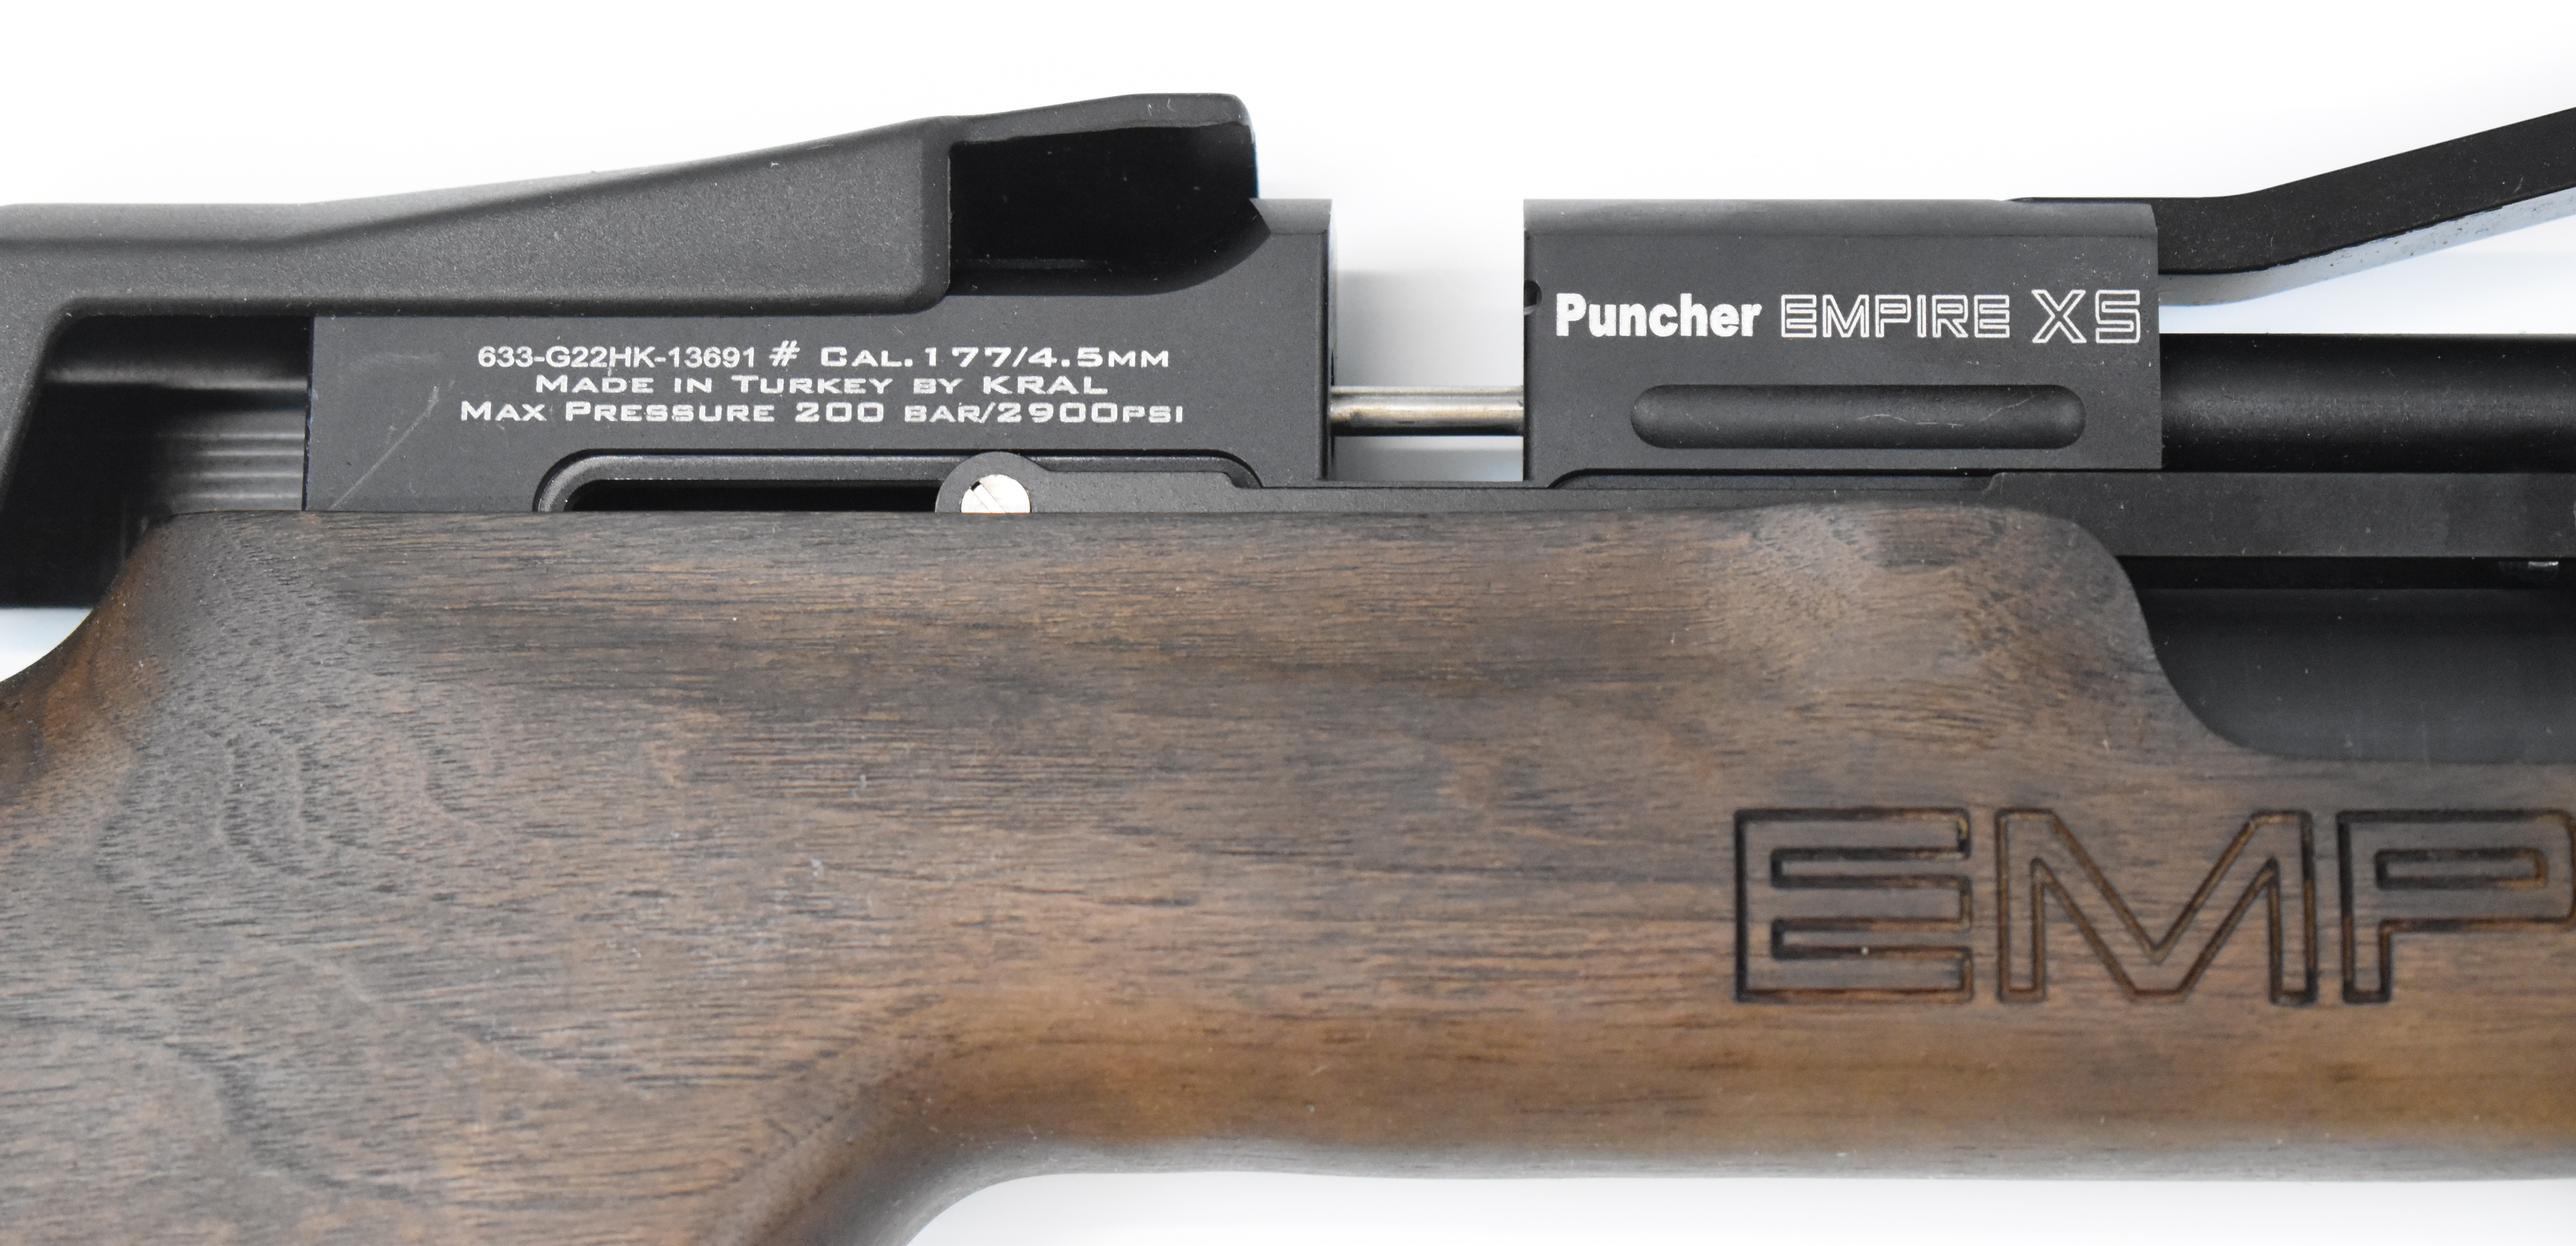 Kral Puncher Empire XS .177 PCP carbine air rifle with textured pistol grip, two 14-shot magazines - Image 5 of 9